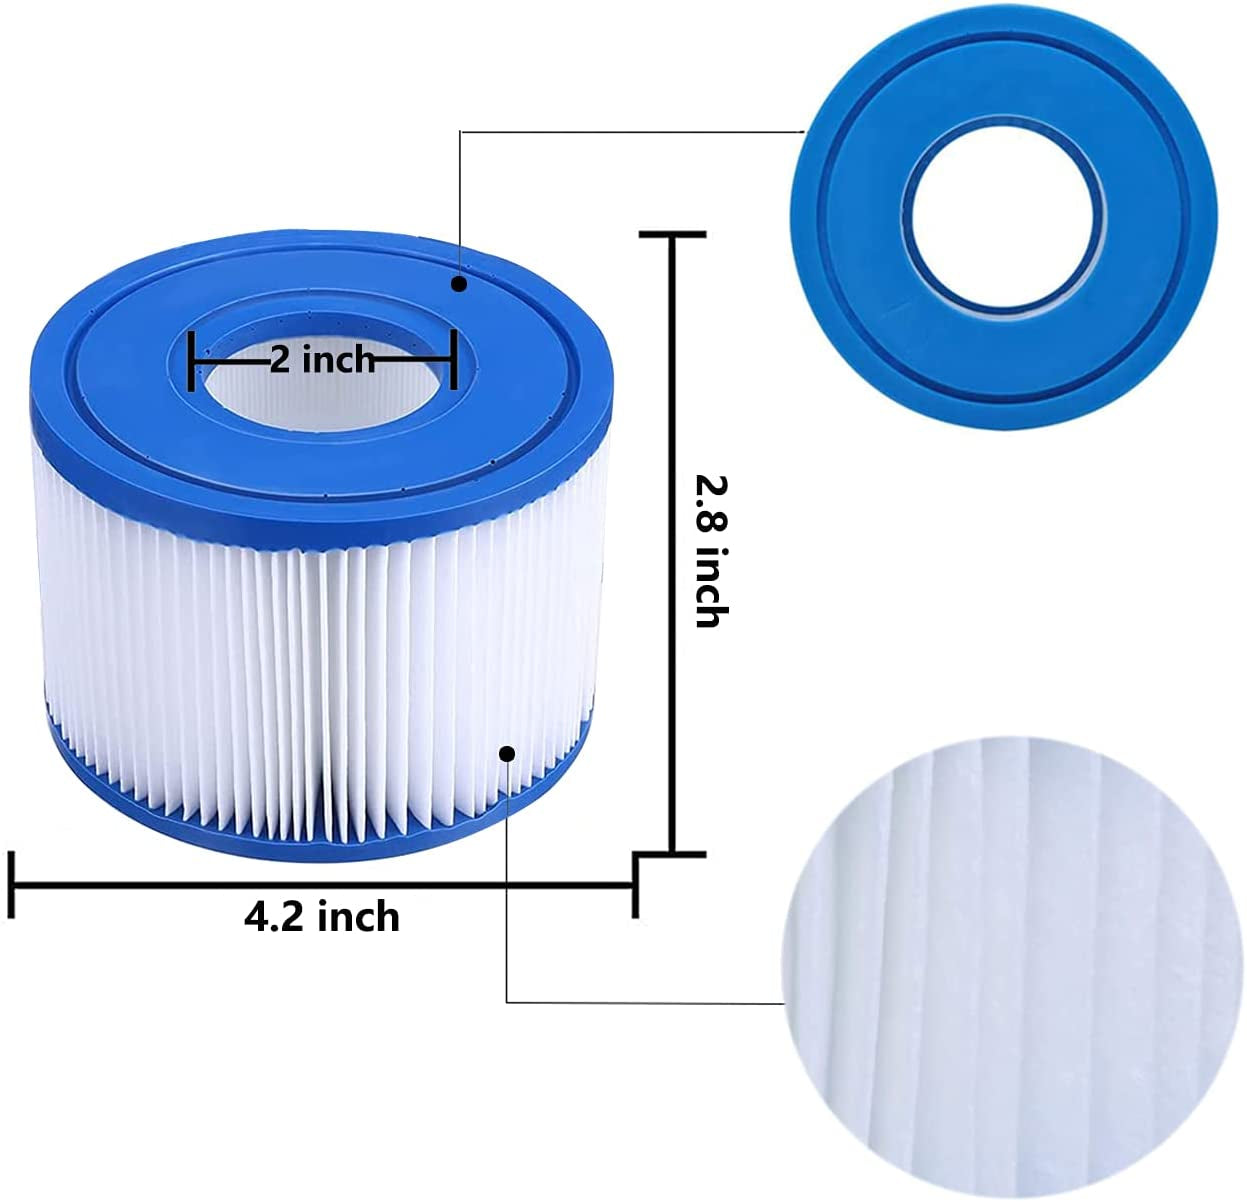 Lxiyu, Lxiyu 6-Pack Swimming Pool Spa Replacement Cartridge Type S1,For Intex-29001E 11692 Hot Tub Filters Type S1 Purespa Filter Pump Cartridge